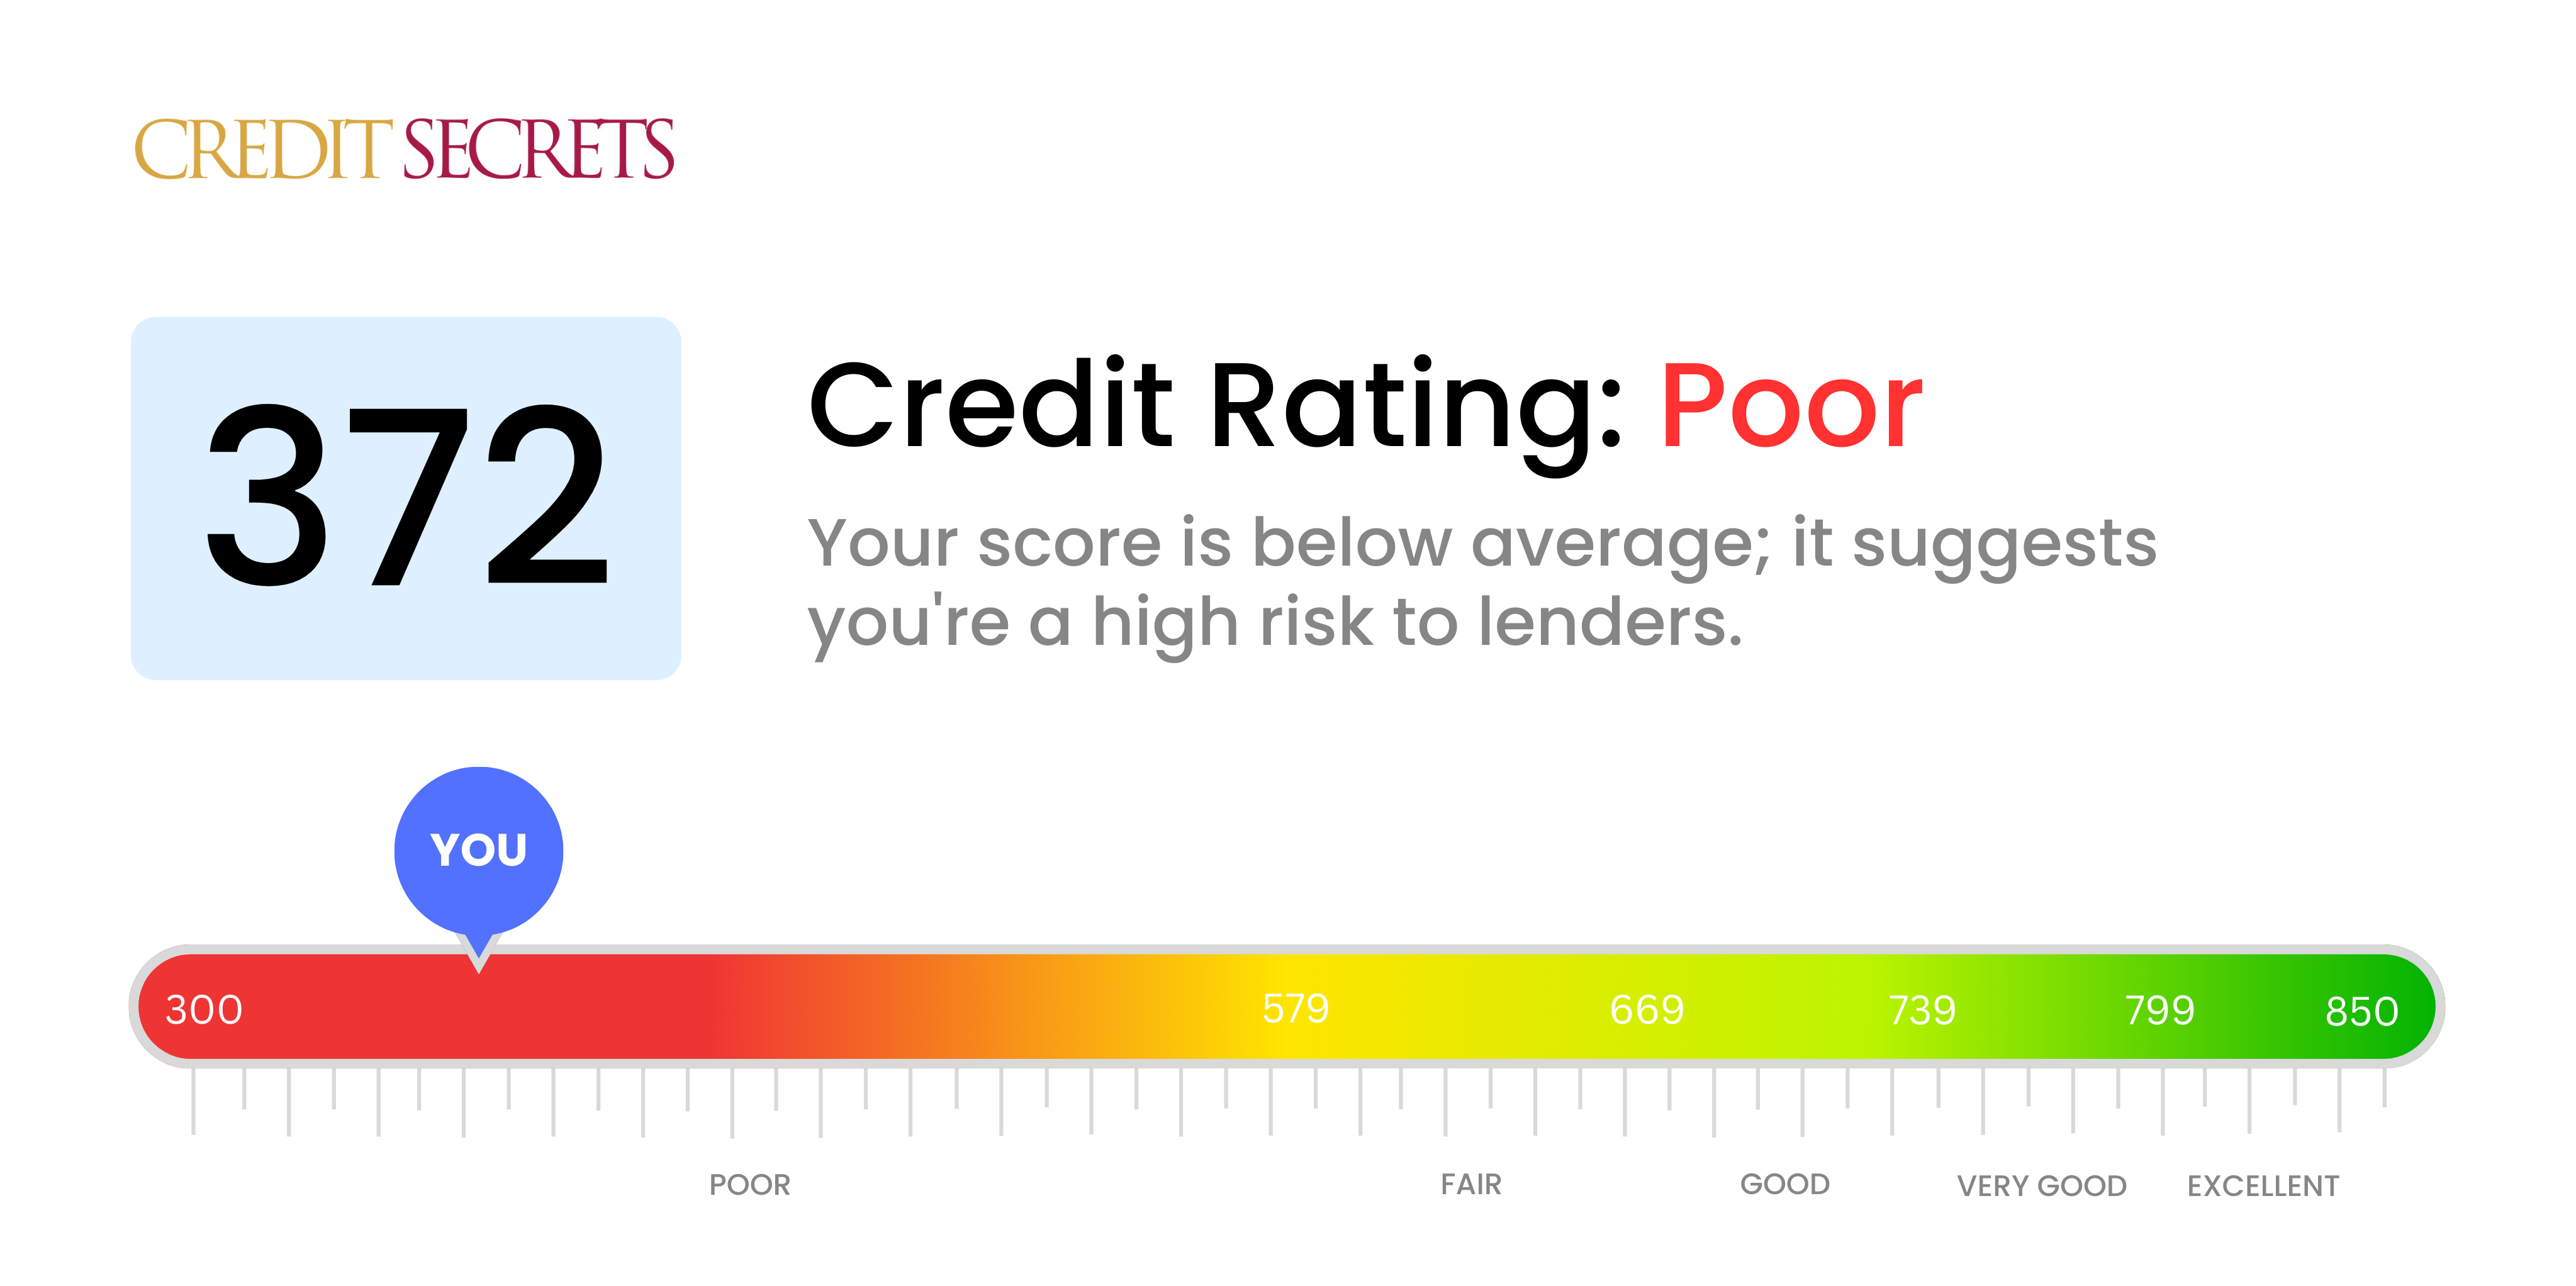 Is 372 a good credit score?